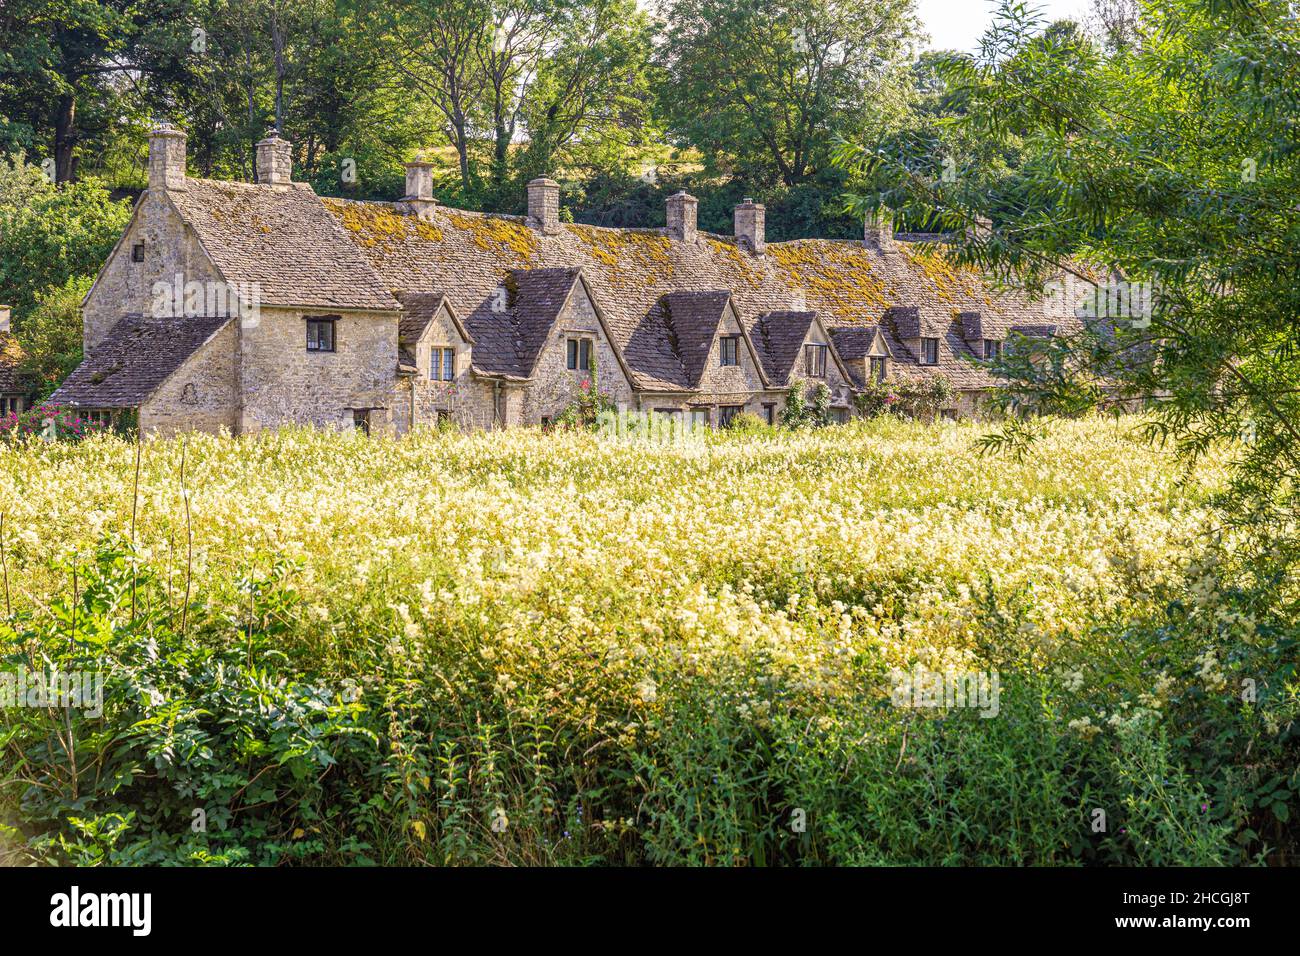 Evening light falling on Arlington Row, 14th century weavers cottages in the Cotswold village of Bibury, Gloucestershire UK. Viewed across Rack Isle. Stock Photo